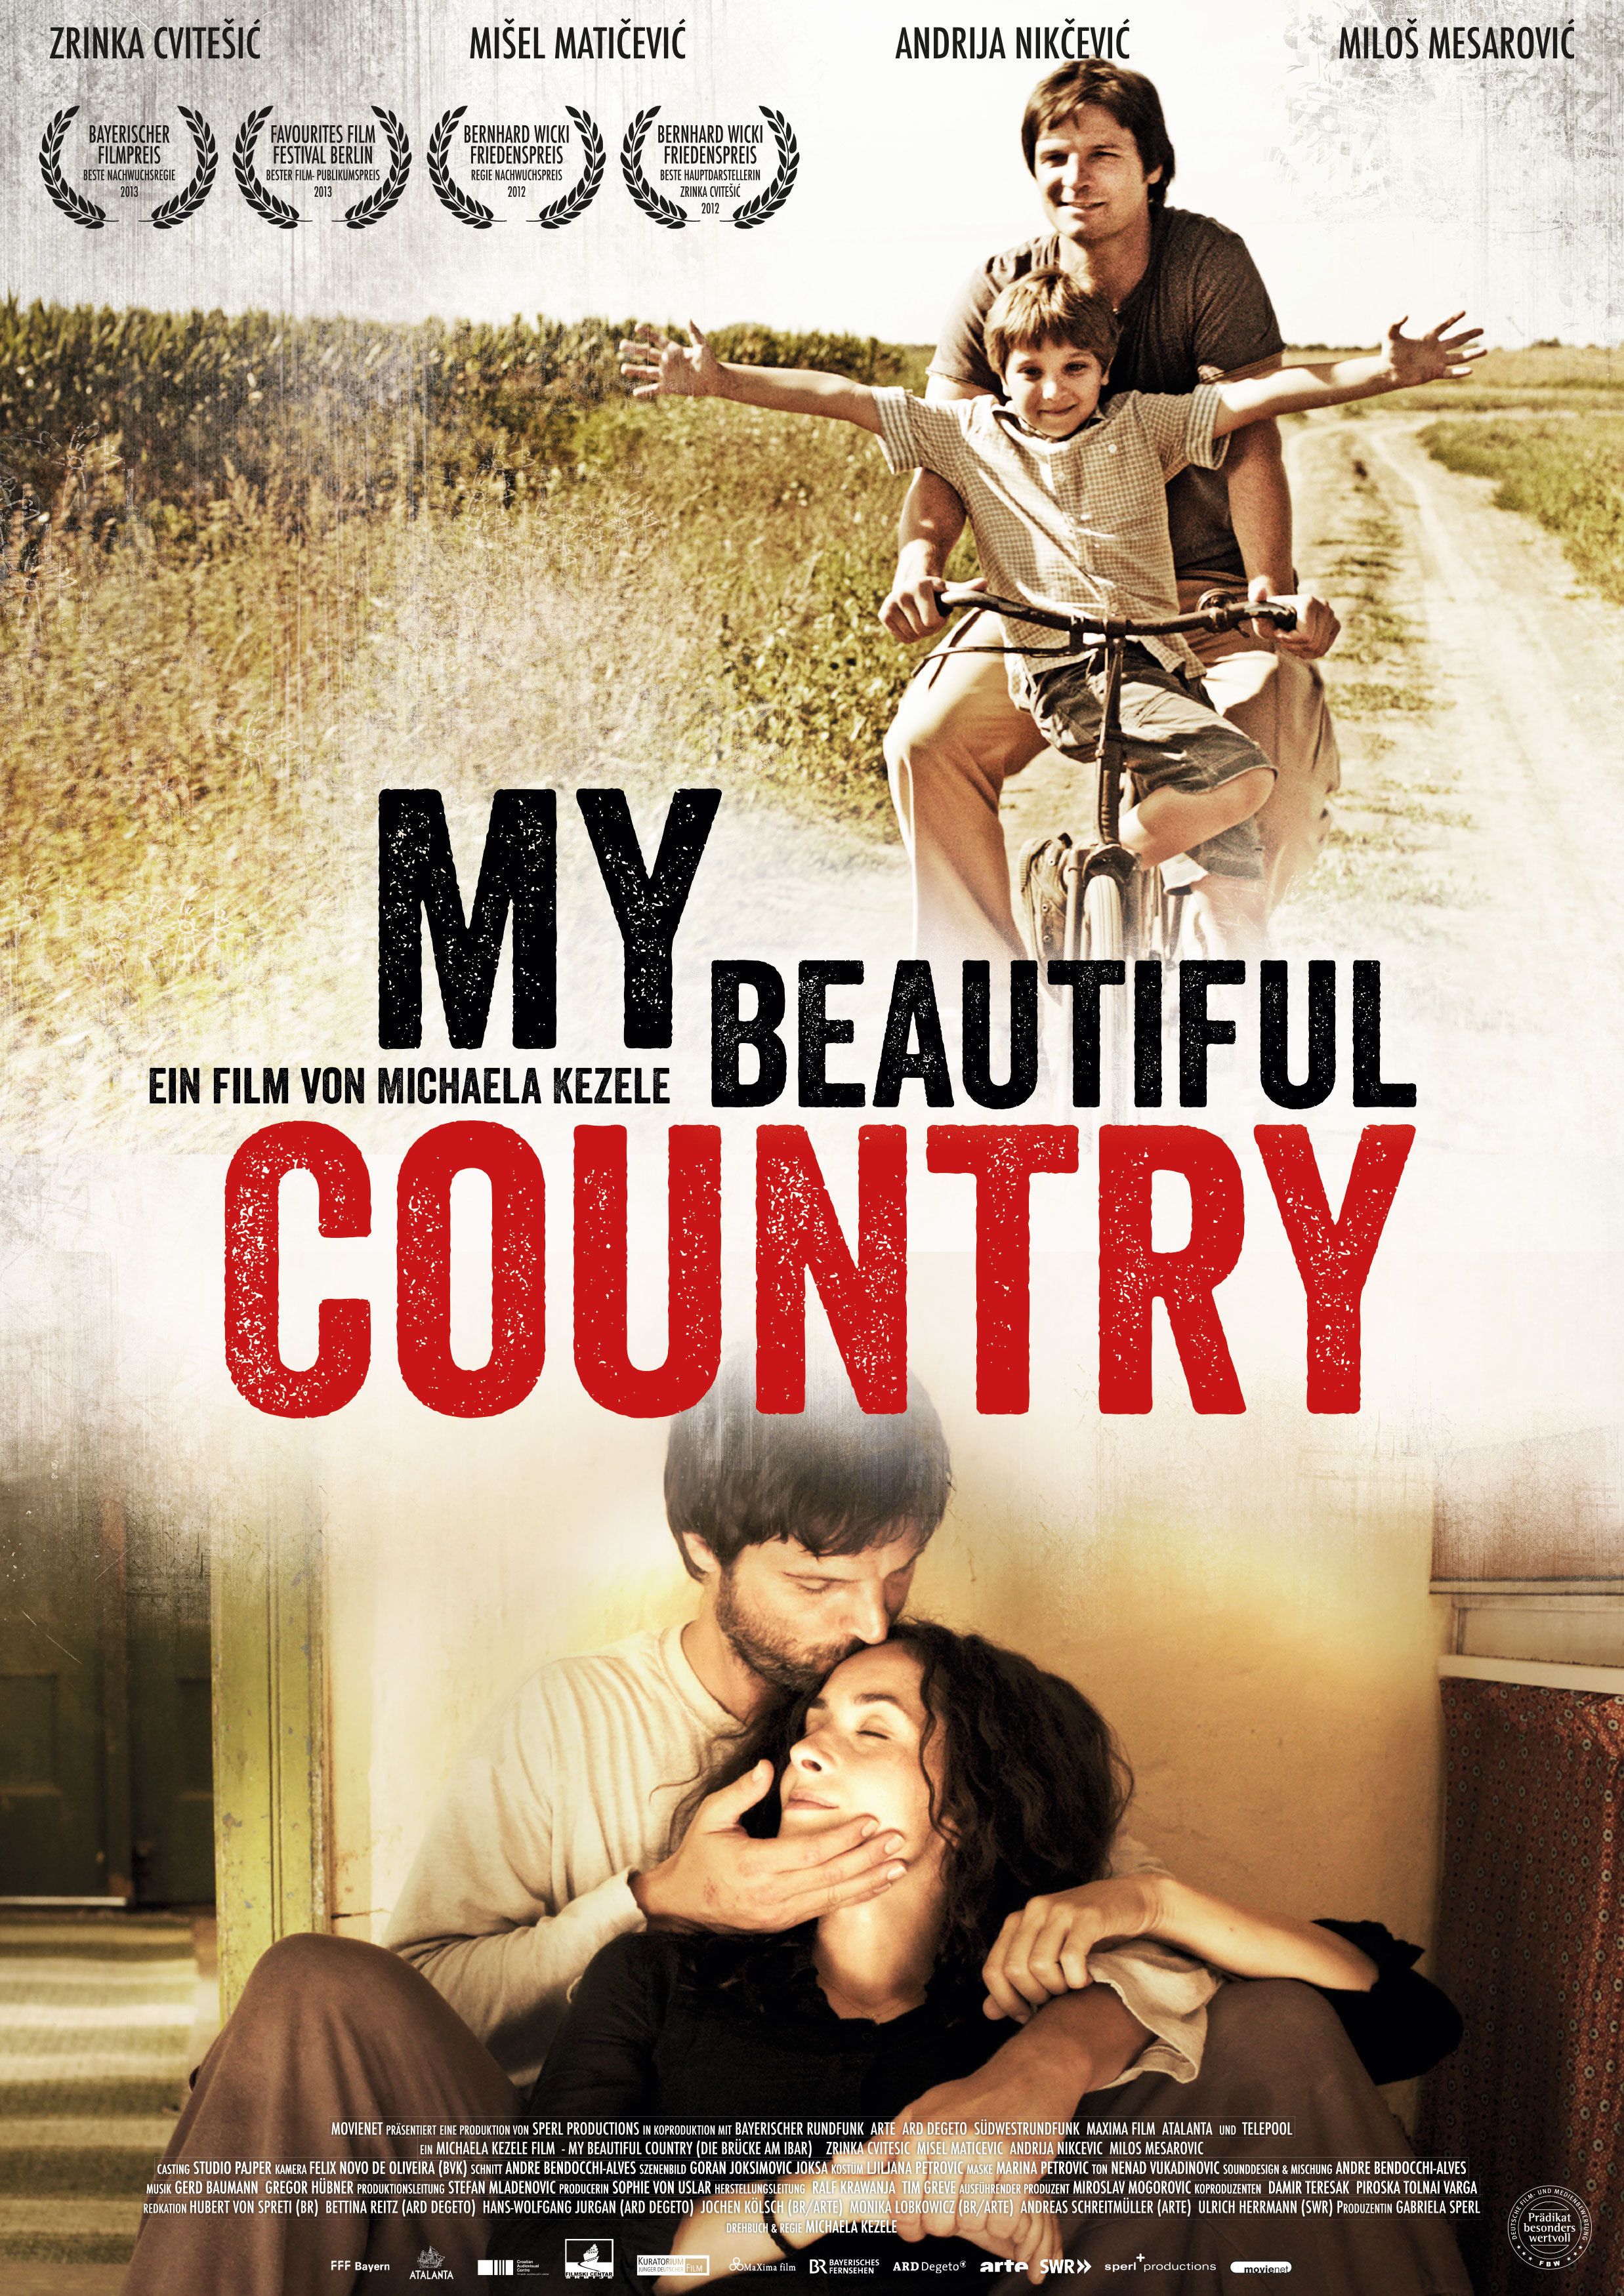 book review of beautiful country